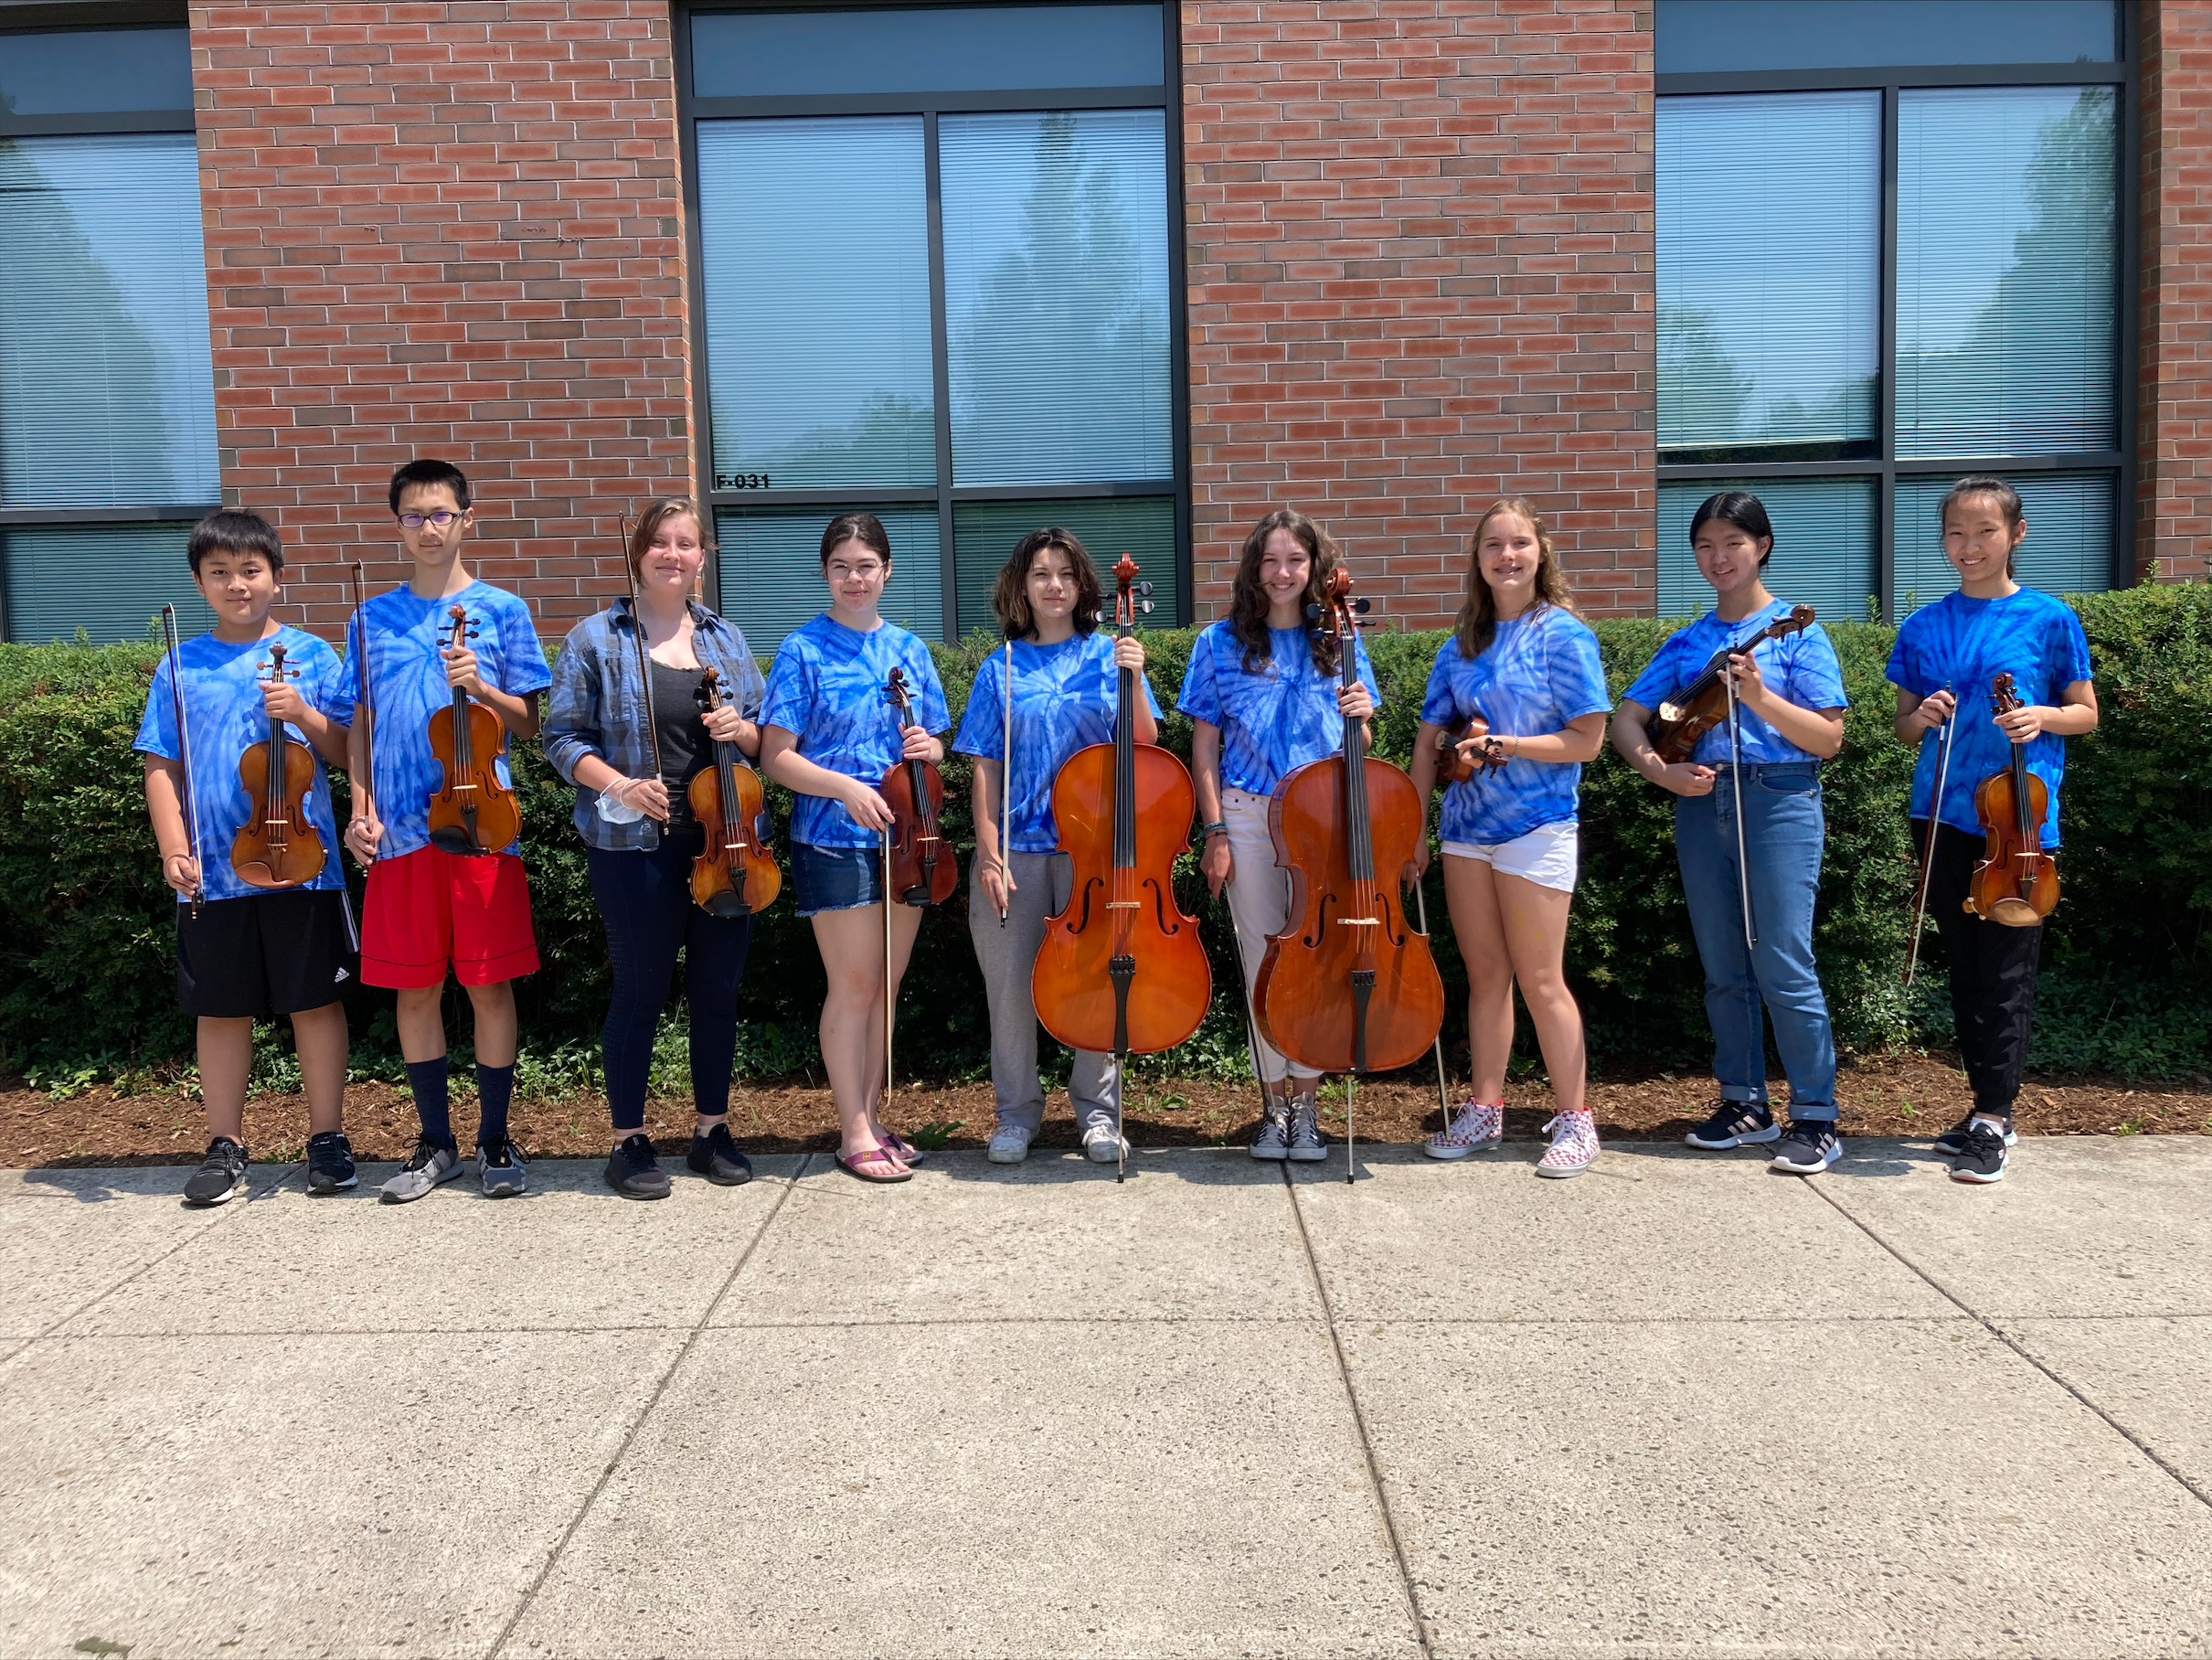 Group of musicians lined up along a brick wall, holding a variety of string instruments.